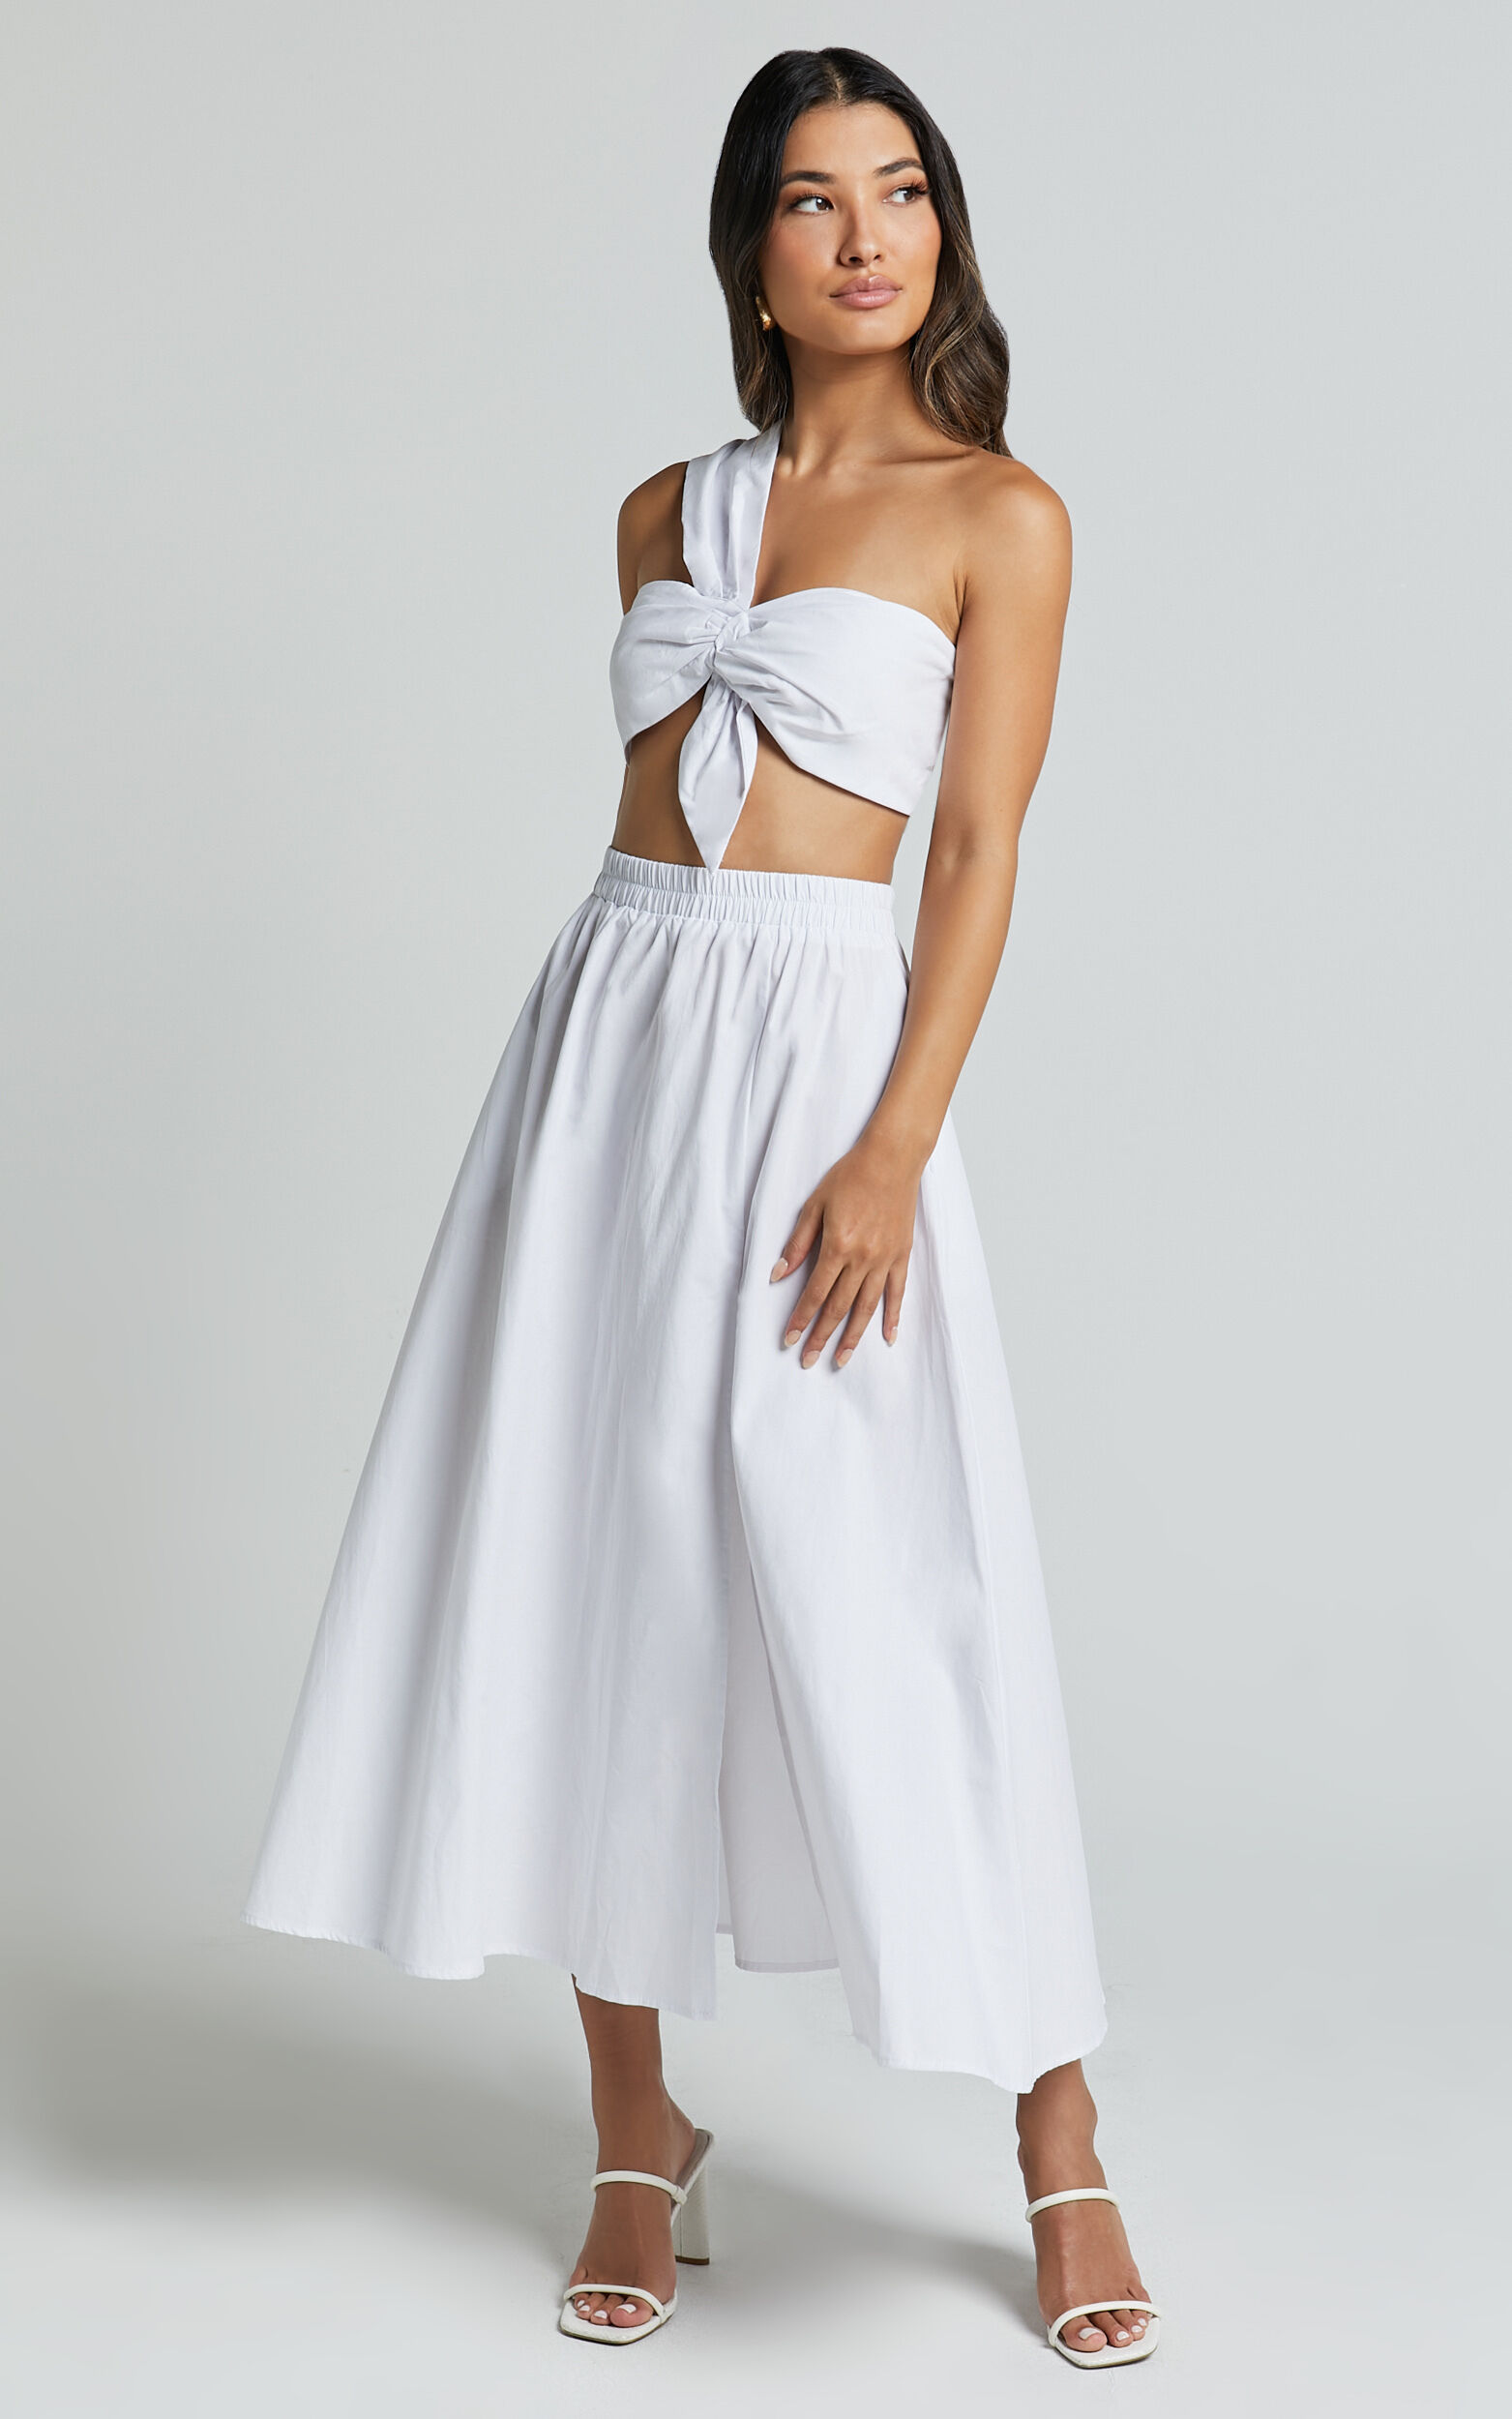 Sula Two Piece Set - One Shoulder Bralette Crop Top and Midi Skirt Set in  Pink